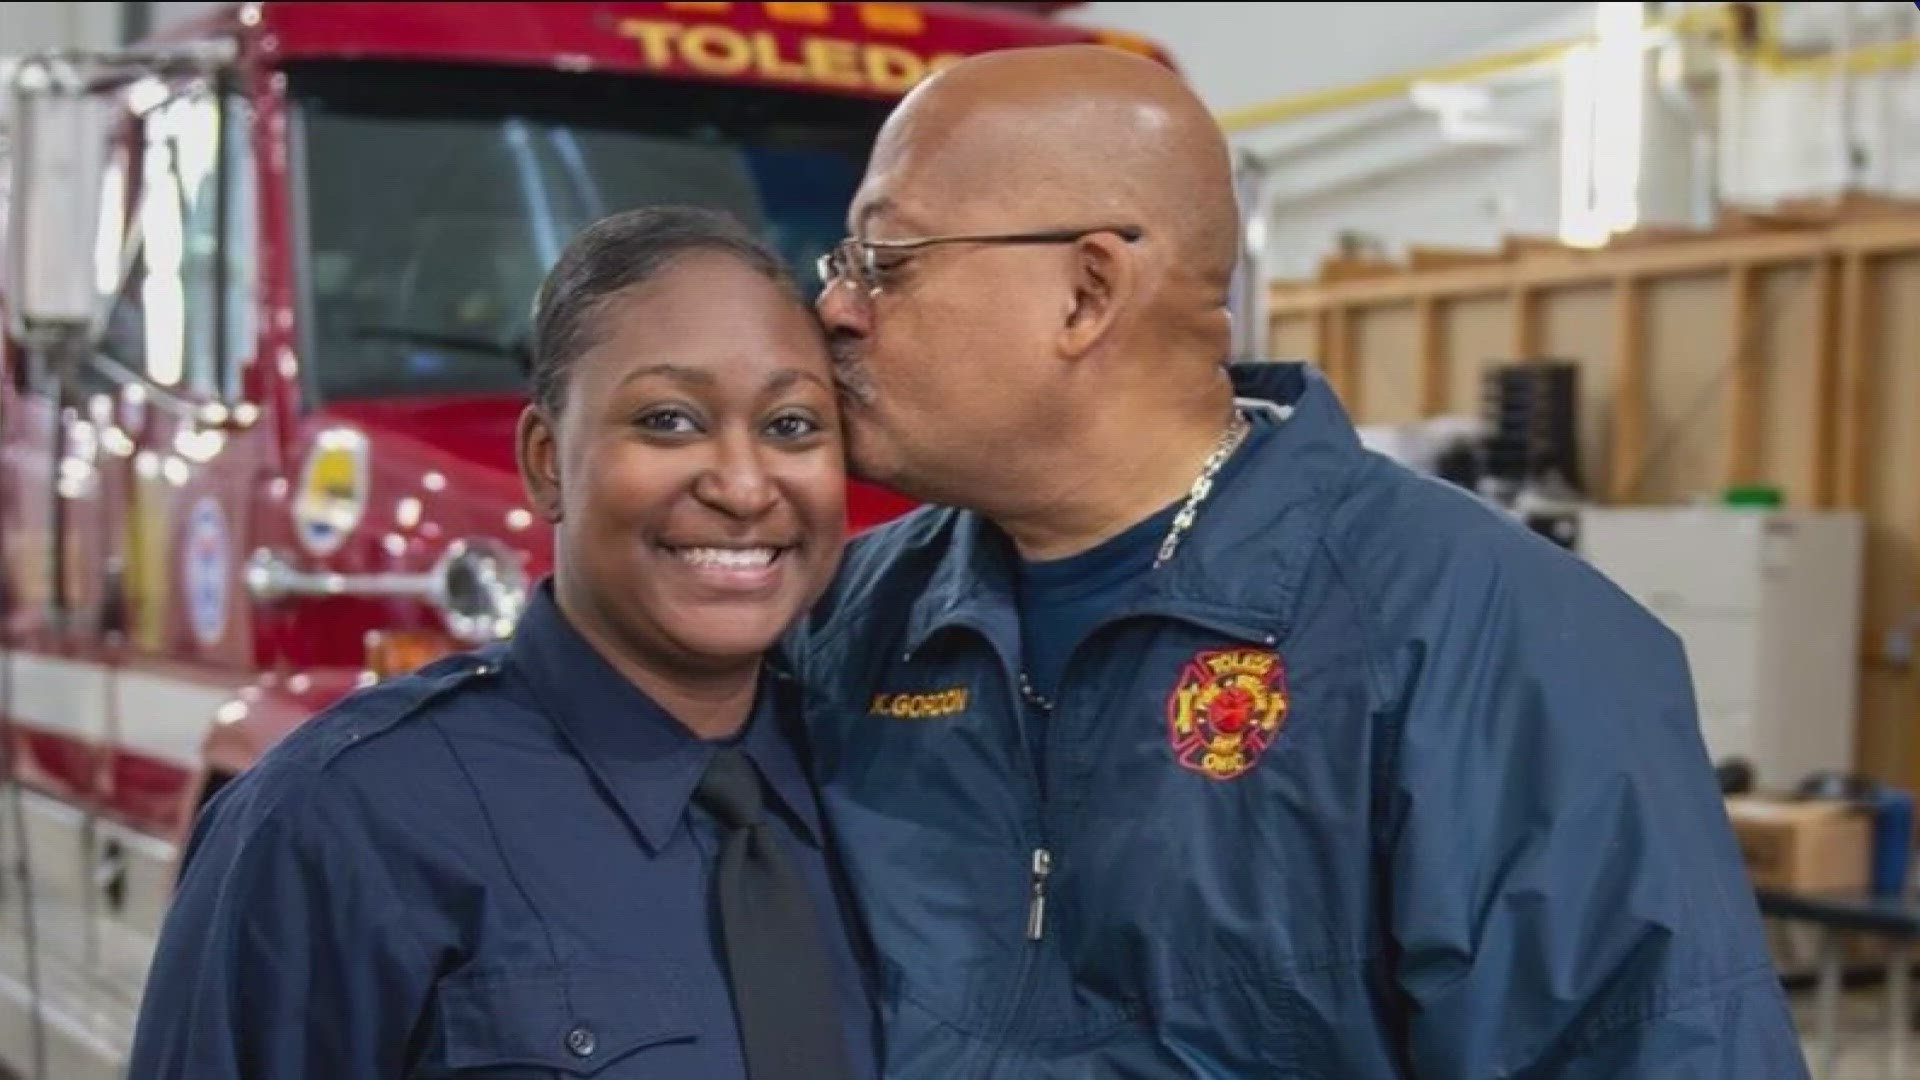 Kevin Gordon retired from the TFRD after 25 years of service, his daughter Kendra Borum just took her oath.